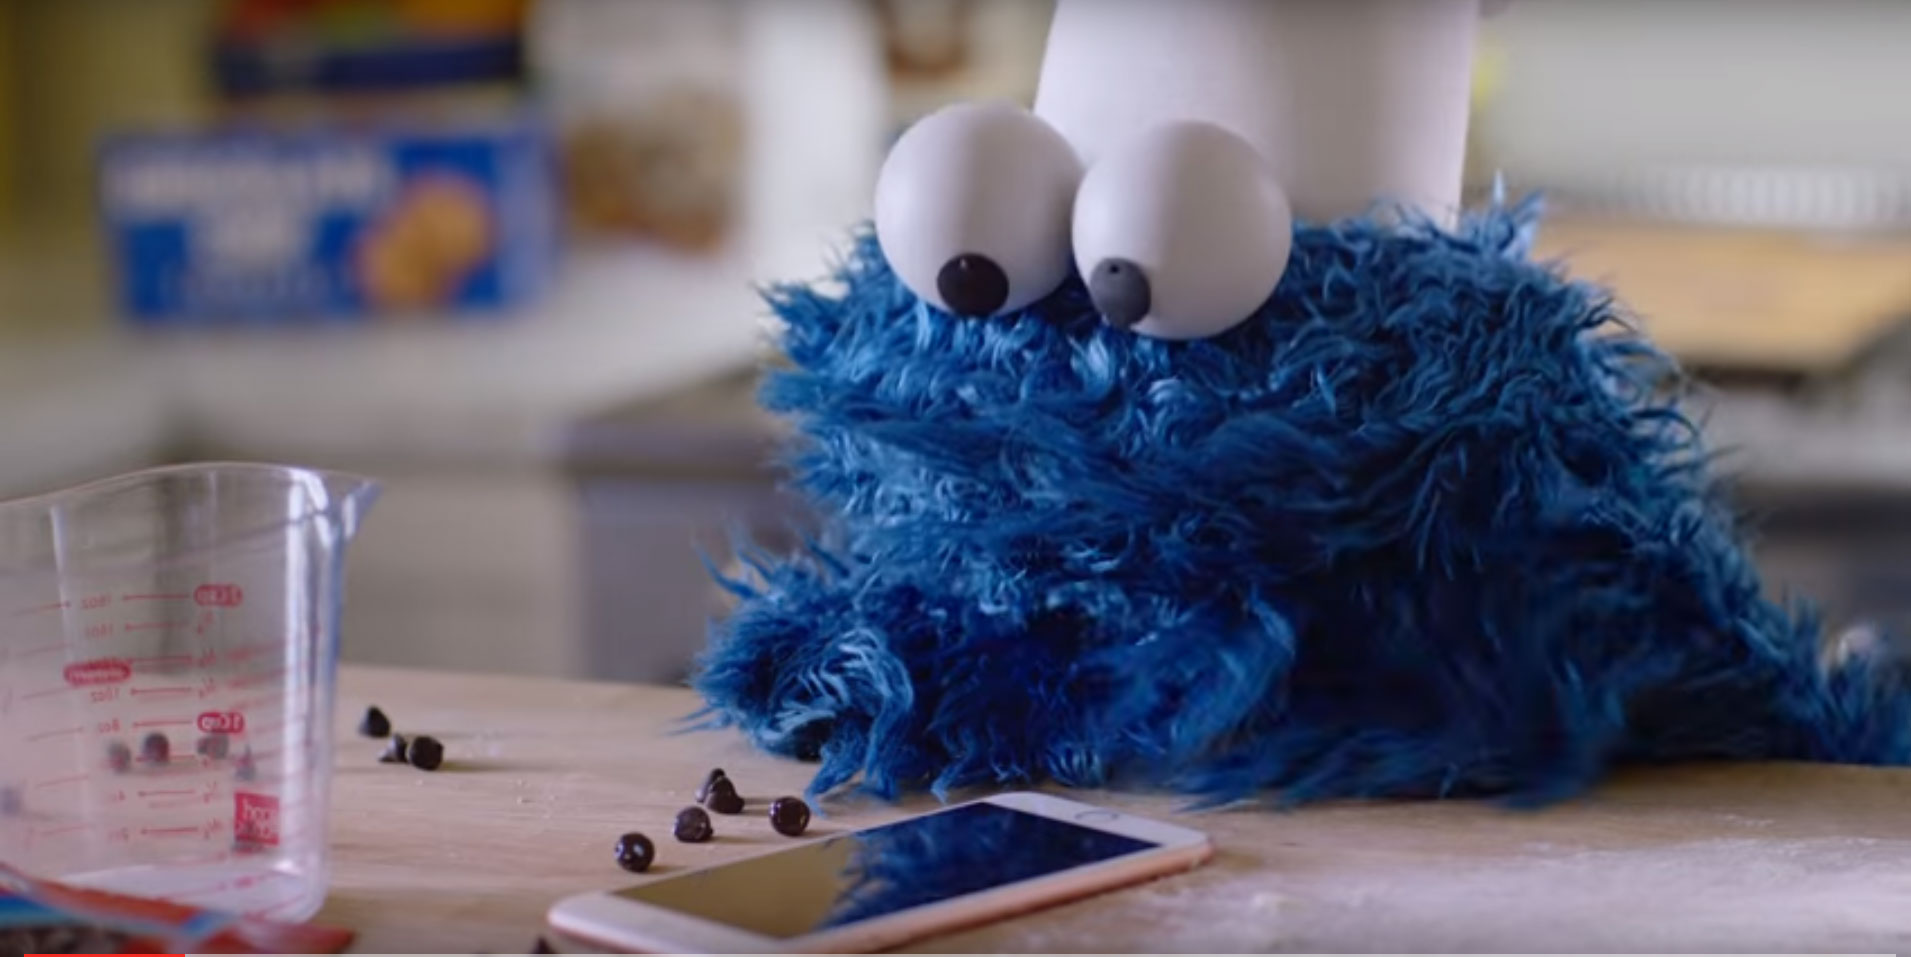 Apple’s Cookie Monster ‘outtakes’ ad is real treat (Video)